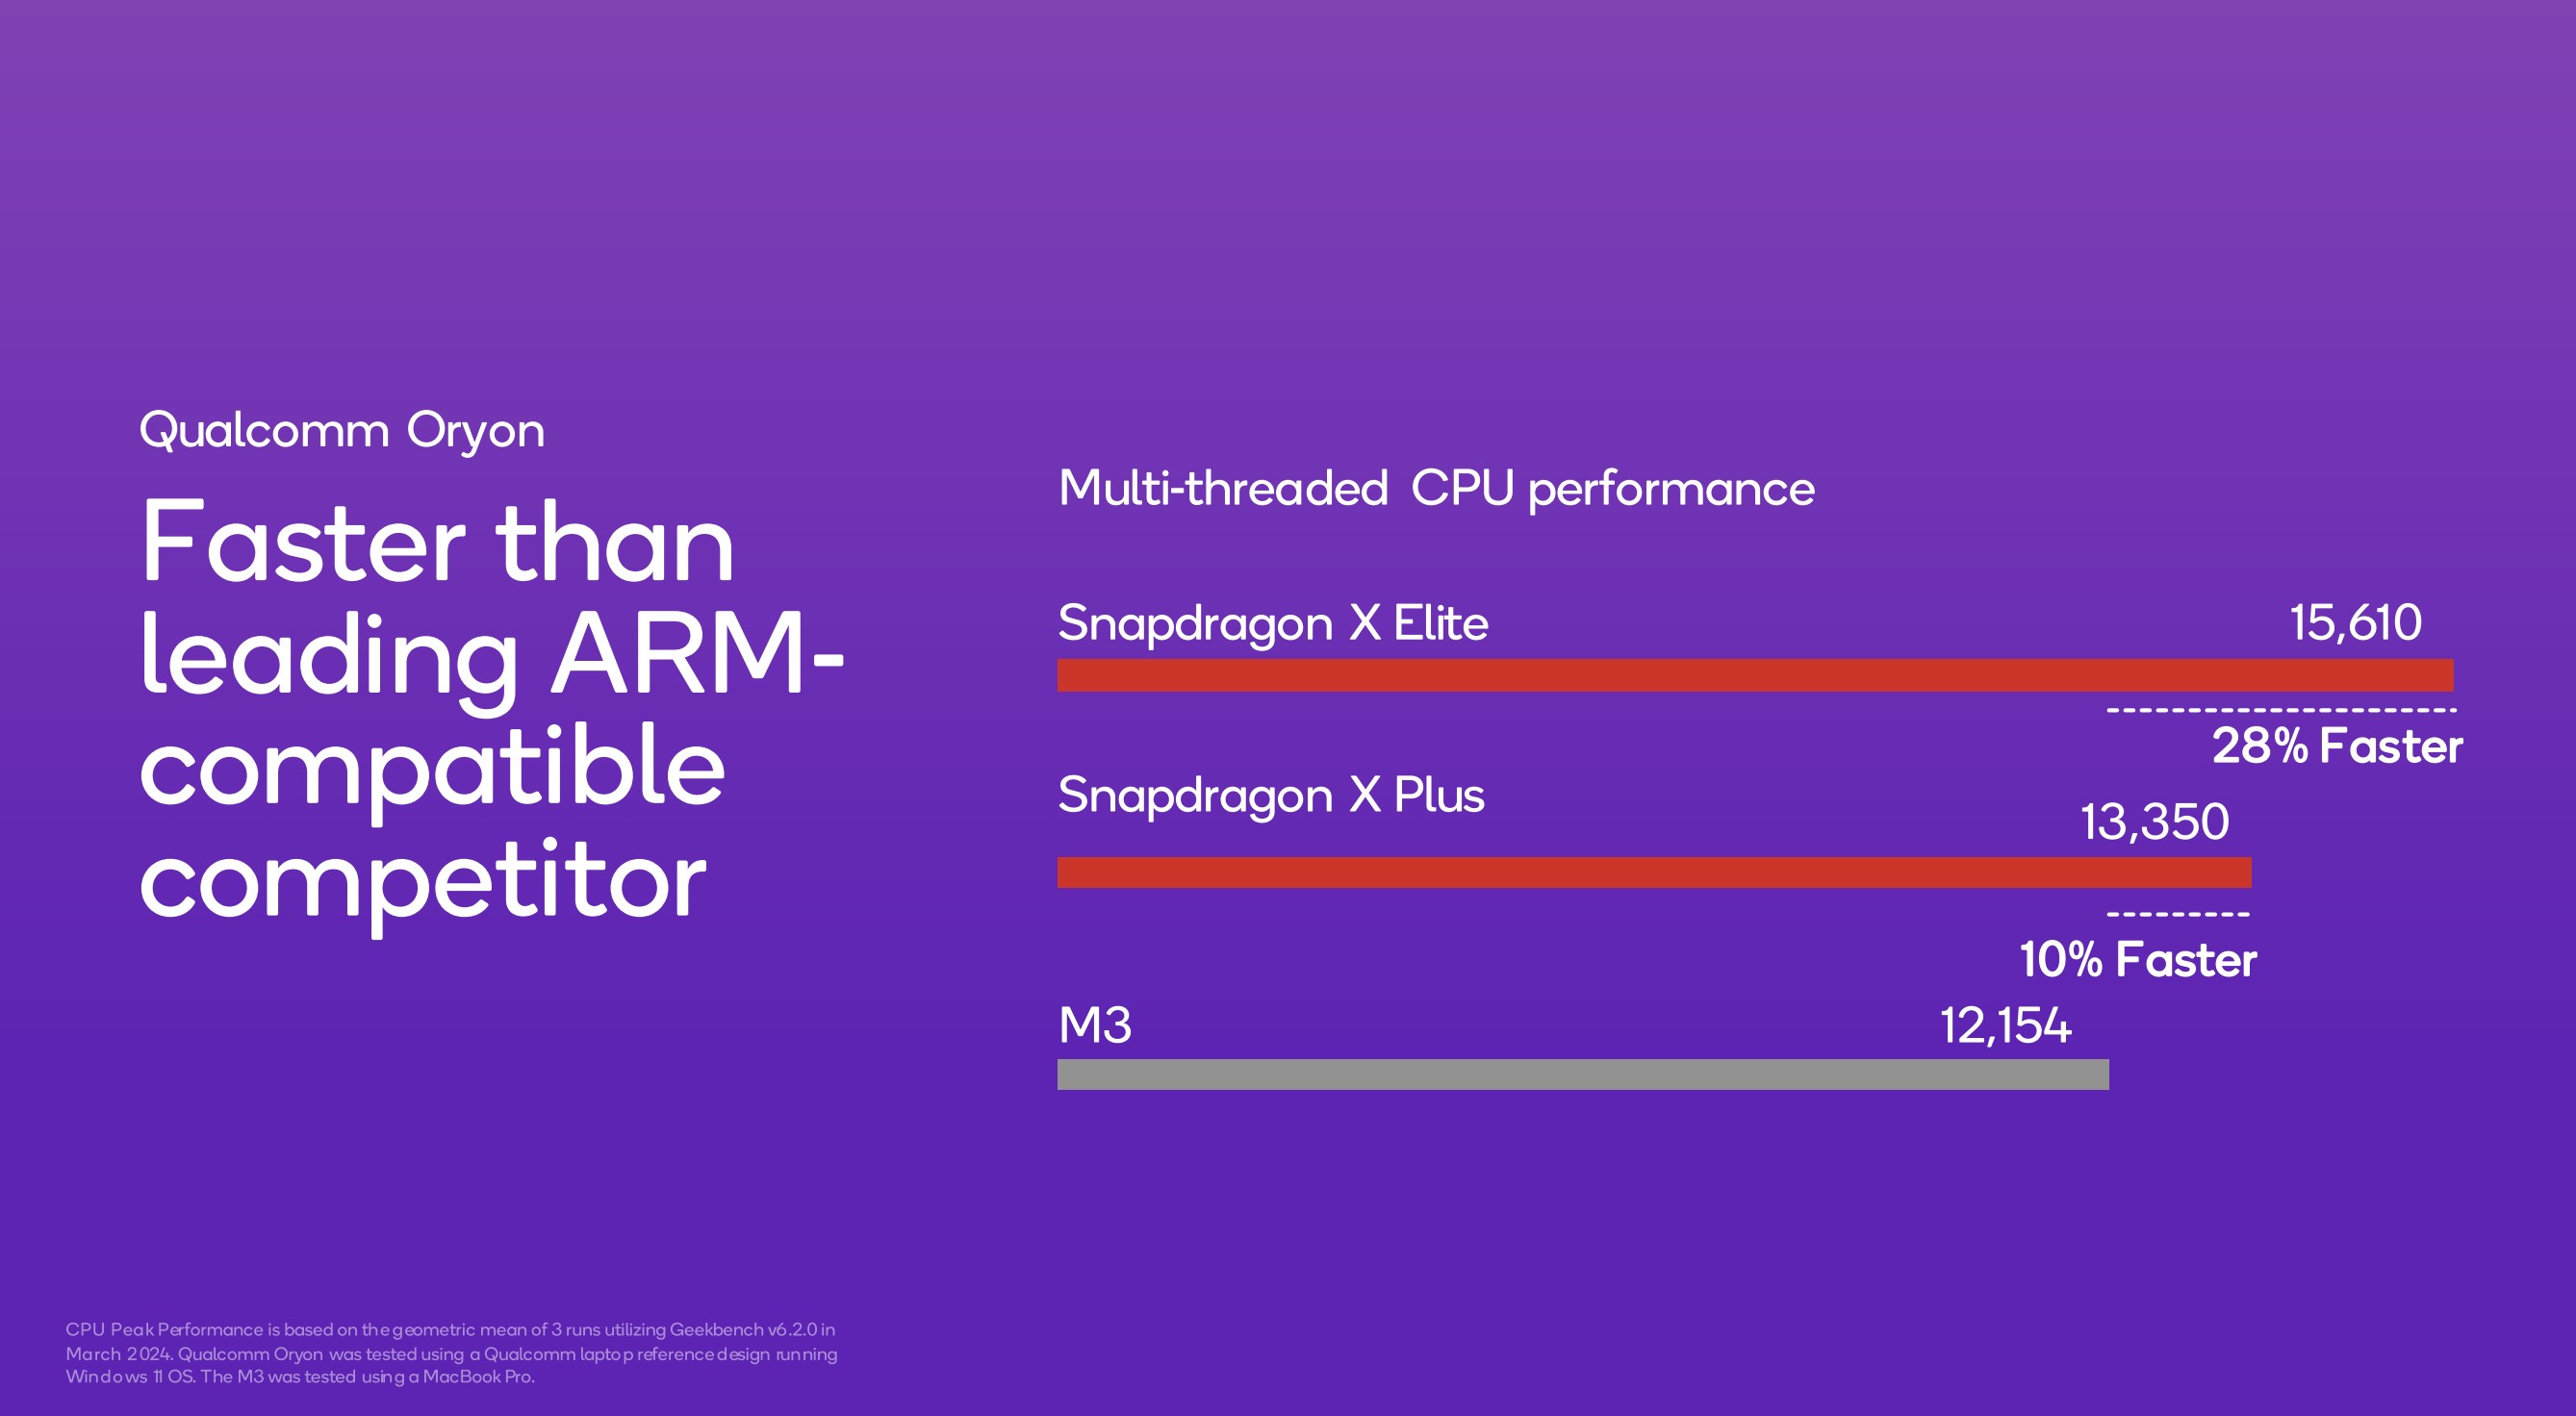 Benchmarks from the new Snapdragon X Plus CPU